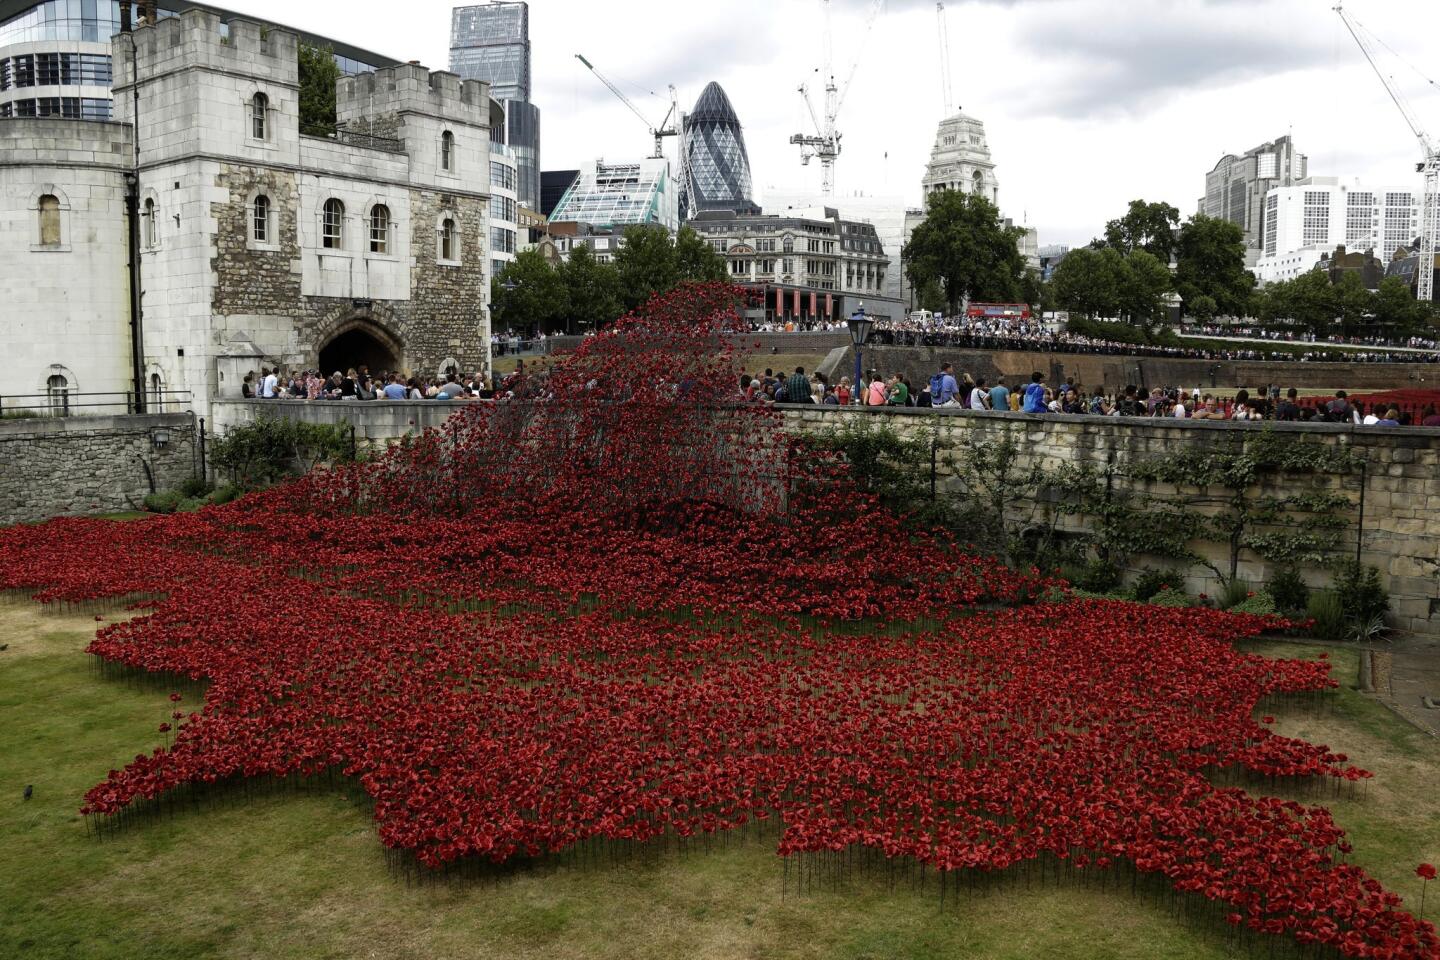 Blood-red ceramic poppies are part of a massive art installation to mark the hundred years since the start of World War I. Artist Paul Cummins' designed the poppies used in "Blood Swept Lands and Seas of Red" unveiled at the Tower of London on Aug. 5.